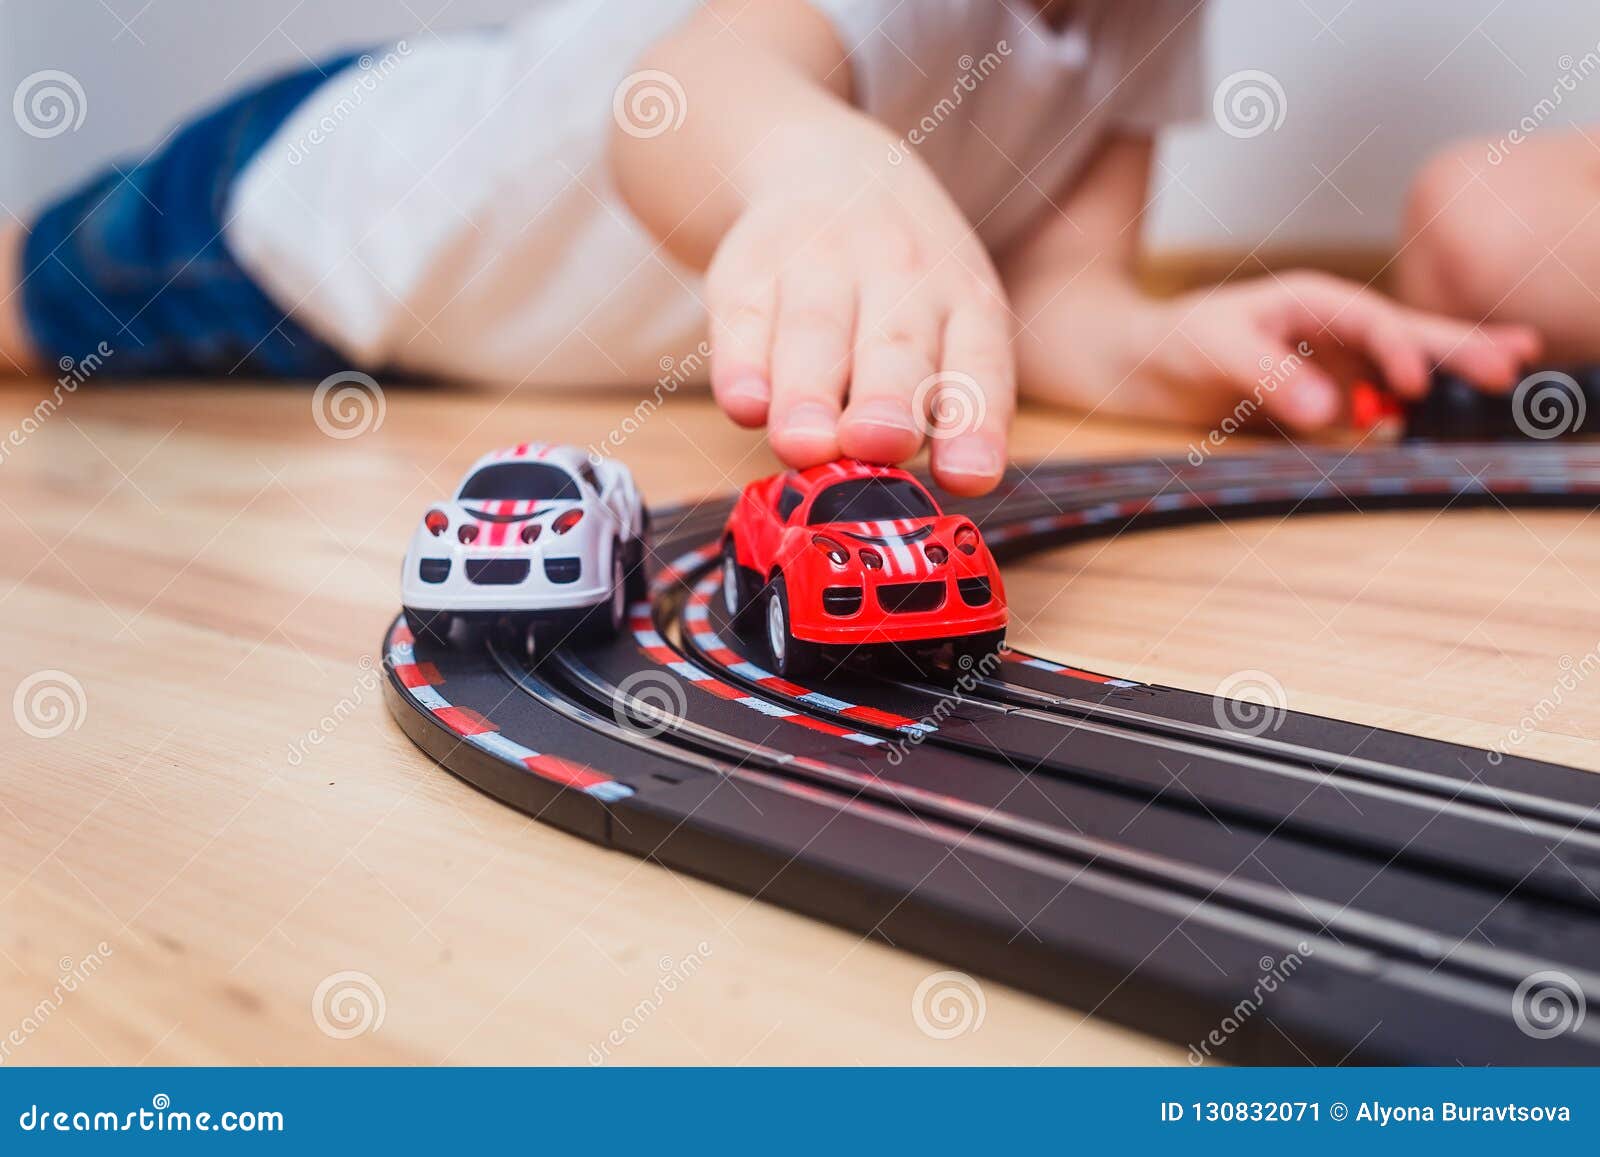 toy car track racing